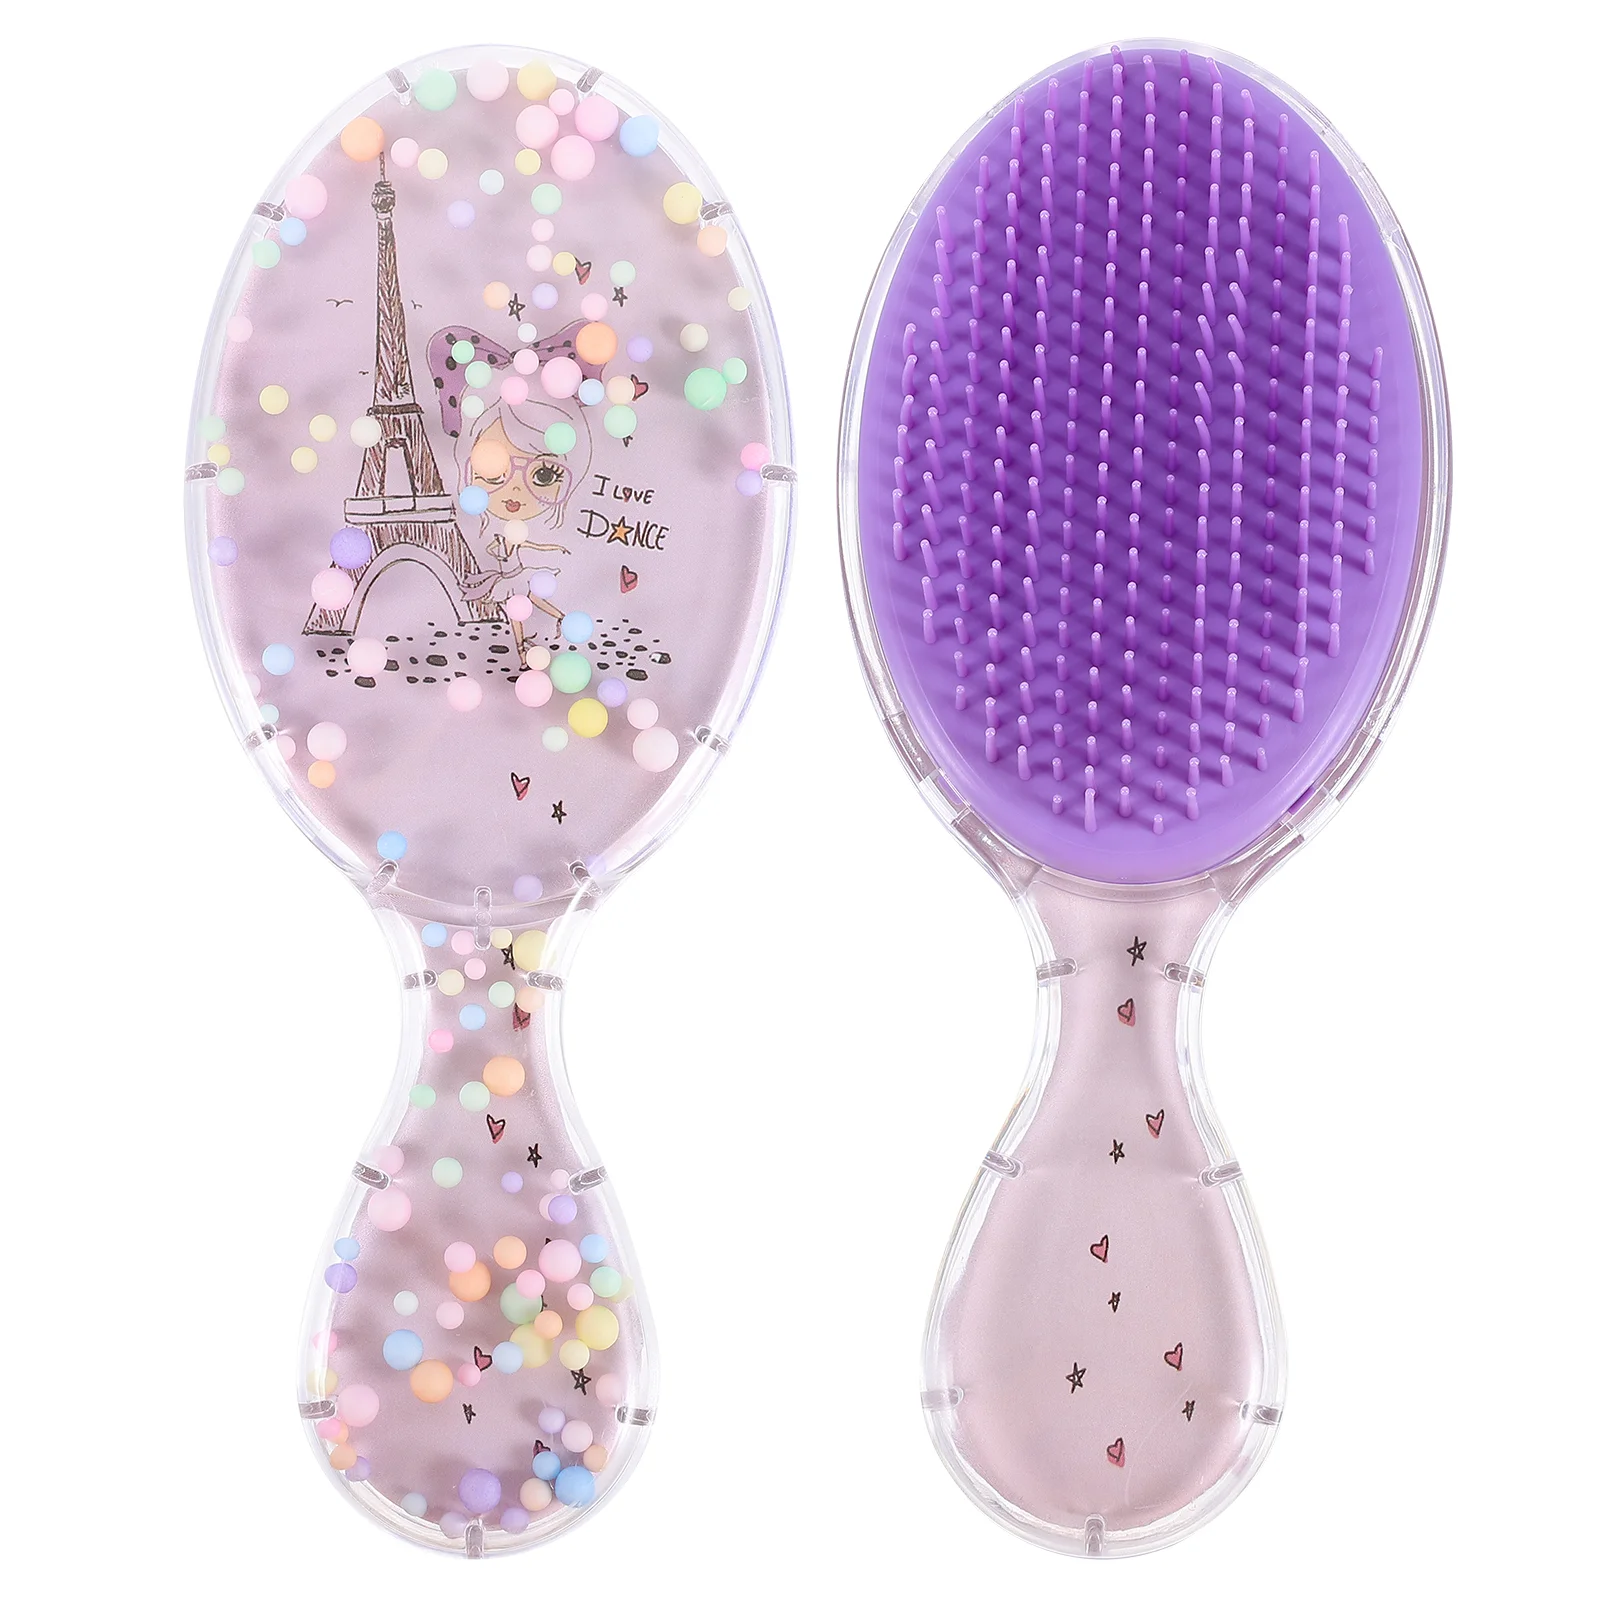 2 pcs Detangling Brush For Hair Girl Hair Portable Hair Brush Cute Hair Brush for Travel pig bristle curling comb hair brushes for curly round styling blow drying detangling thick